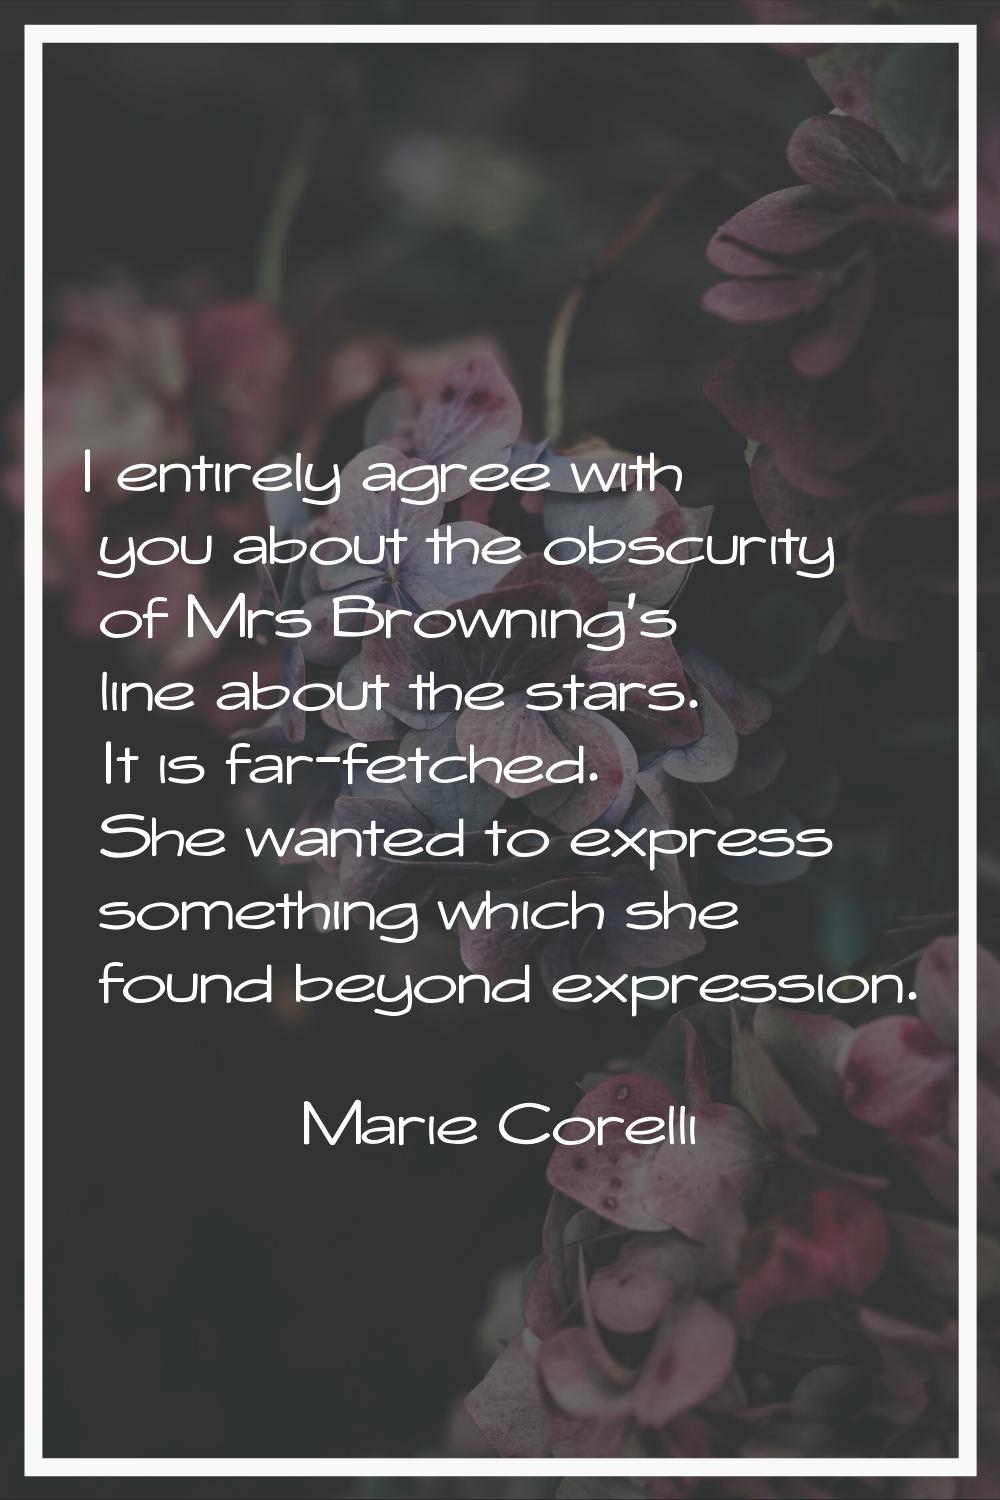 I entirely agree with you about the obscurity of Mrs Browning's line about the stars. It is far-fet